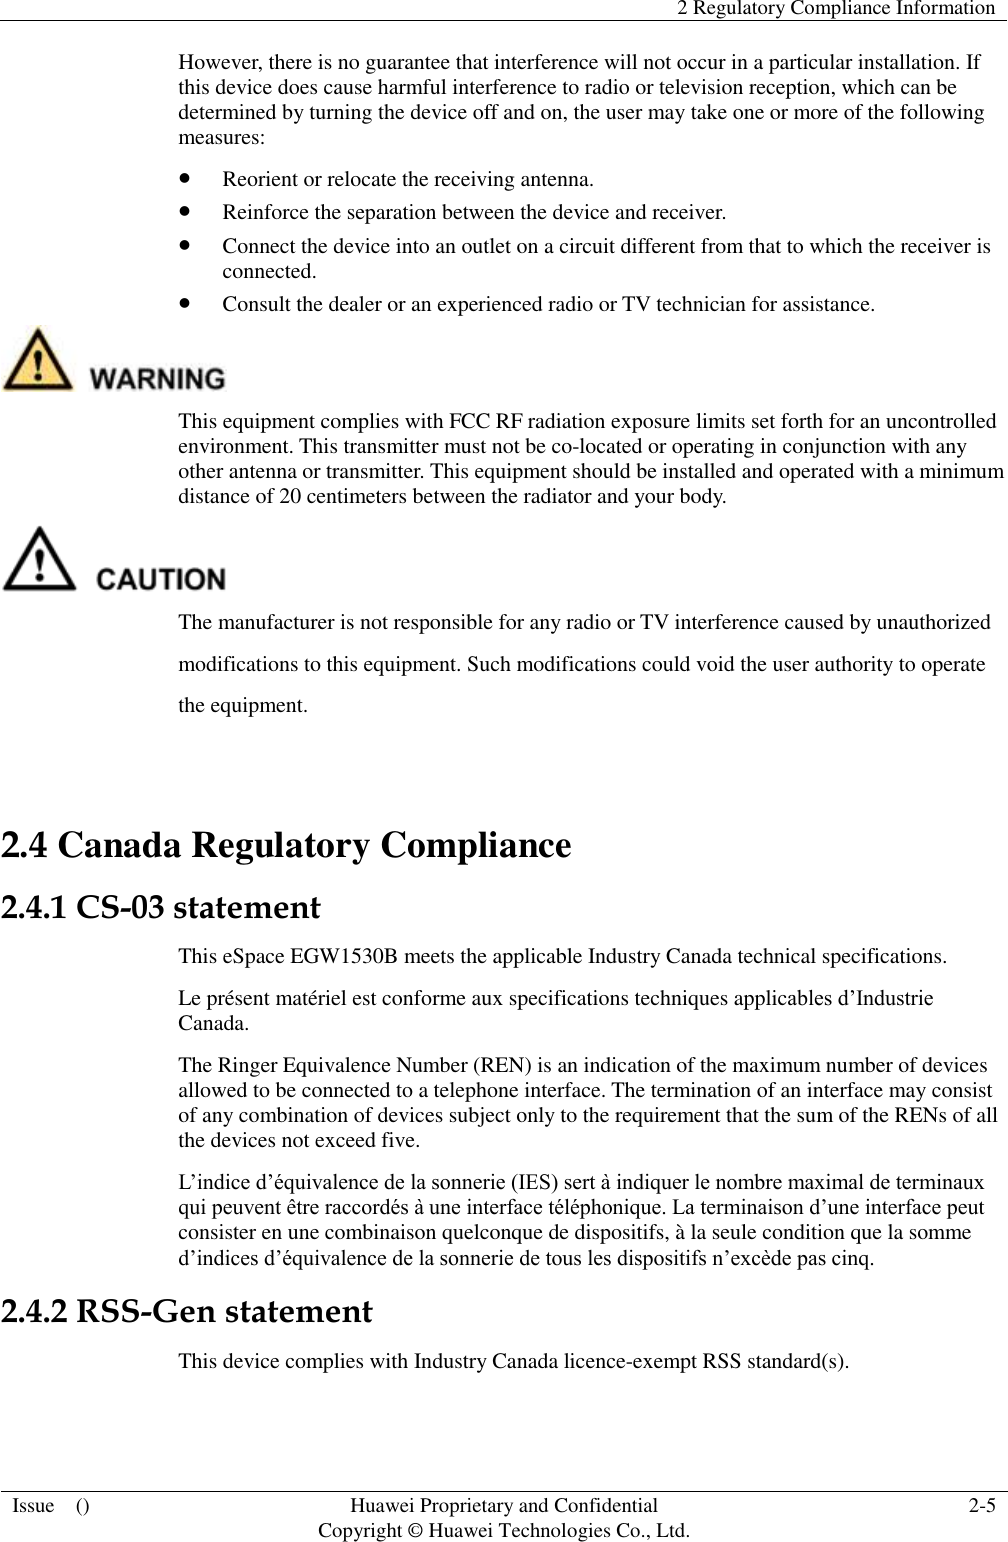   2 Regulatory Compliance Information  Issue    () Huawei Proprietary and Confidential                                     Copyright © Huawei Technologies Co., Ltd. 2-5  However, there is no guarantee that interference will not occur in a particular installation. If this device does cause harmful interference to radio or television reception, which can be determined by turning the device off and on, the user may take one or more of the following measures:  Reorient or relocate the receiving antenna.  Reinforce the separation between the device and receiver.  Connect the device into an outlet on a circuit different from that to which the receiver is connected.  Consult the dealer or an experienced radio or TV technician for assistance.  This equipment complies with FCC RF radiation exposure limits set forth for an uncontrolled environment. This transmitter must not be co-located or operating in conjunction with any other antenna or transmitter. This equipment should be installed and operated with a minimum distance of 20 centimeters between the radiator and your body.    The manufacturer is not responsible for any radio or TV interference caused by unauthorized modifications to this equipment. Such modifications could void the user authority to operate the equipment.  2.4 Canada Regulatory Compliance 2.4.1 CS-03 statement This eSpace EGW1530B meets the applicable Industry Canada technical specifications.   Le présent matériel est conforme aux specifications techniques applicables d’Industrie Canada. The Ringer Equivalence Number (REN) is an indication of the maximum number of devices allowed to be connected to a telephone interface. The termination of an interface may consist of any combination of devices subject only to the requirement that the sum of the RENs of all the devices not exceed five.   L’indice d’équivalence de la sonnerie (IES) sert à indiquer le nombre maximal de terminaux qui peuvent être raccordés à une interface téléphonique. La terminaison d’une interface peut consister en une combinaison quelconque de dispositifs, à la seule condition que la somme d’indices d’équivalence de la sonnerie de tous les dispositifs n’excède pas cinq. 2.4.2 RSS-Gen statement This device complies with Industry Canada licence-exempt RSS standard(s). 